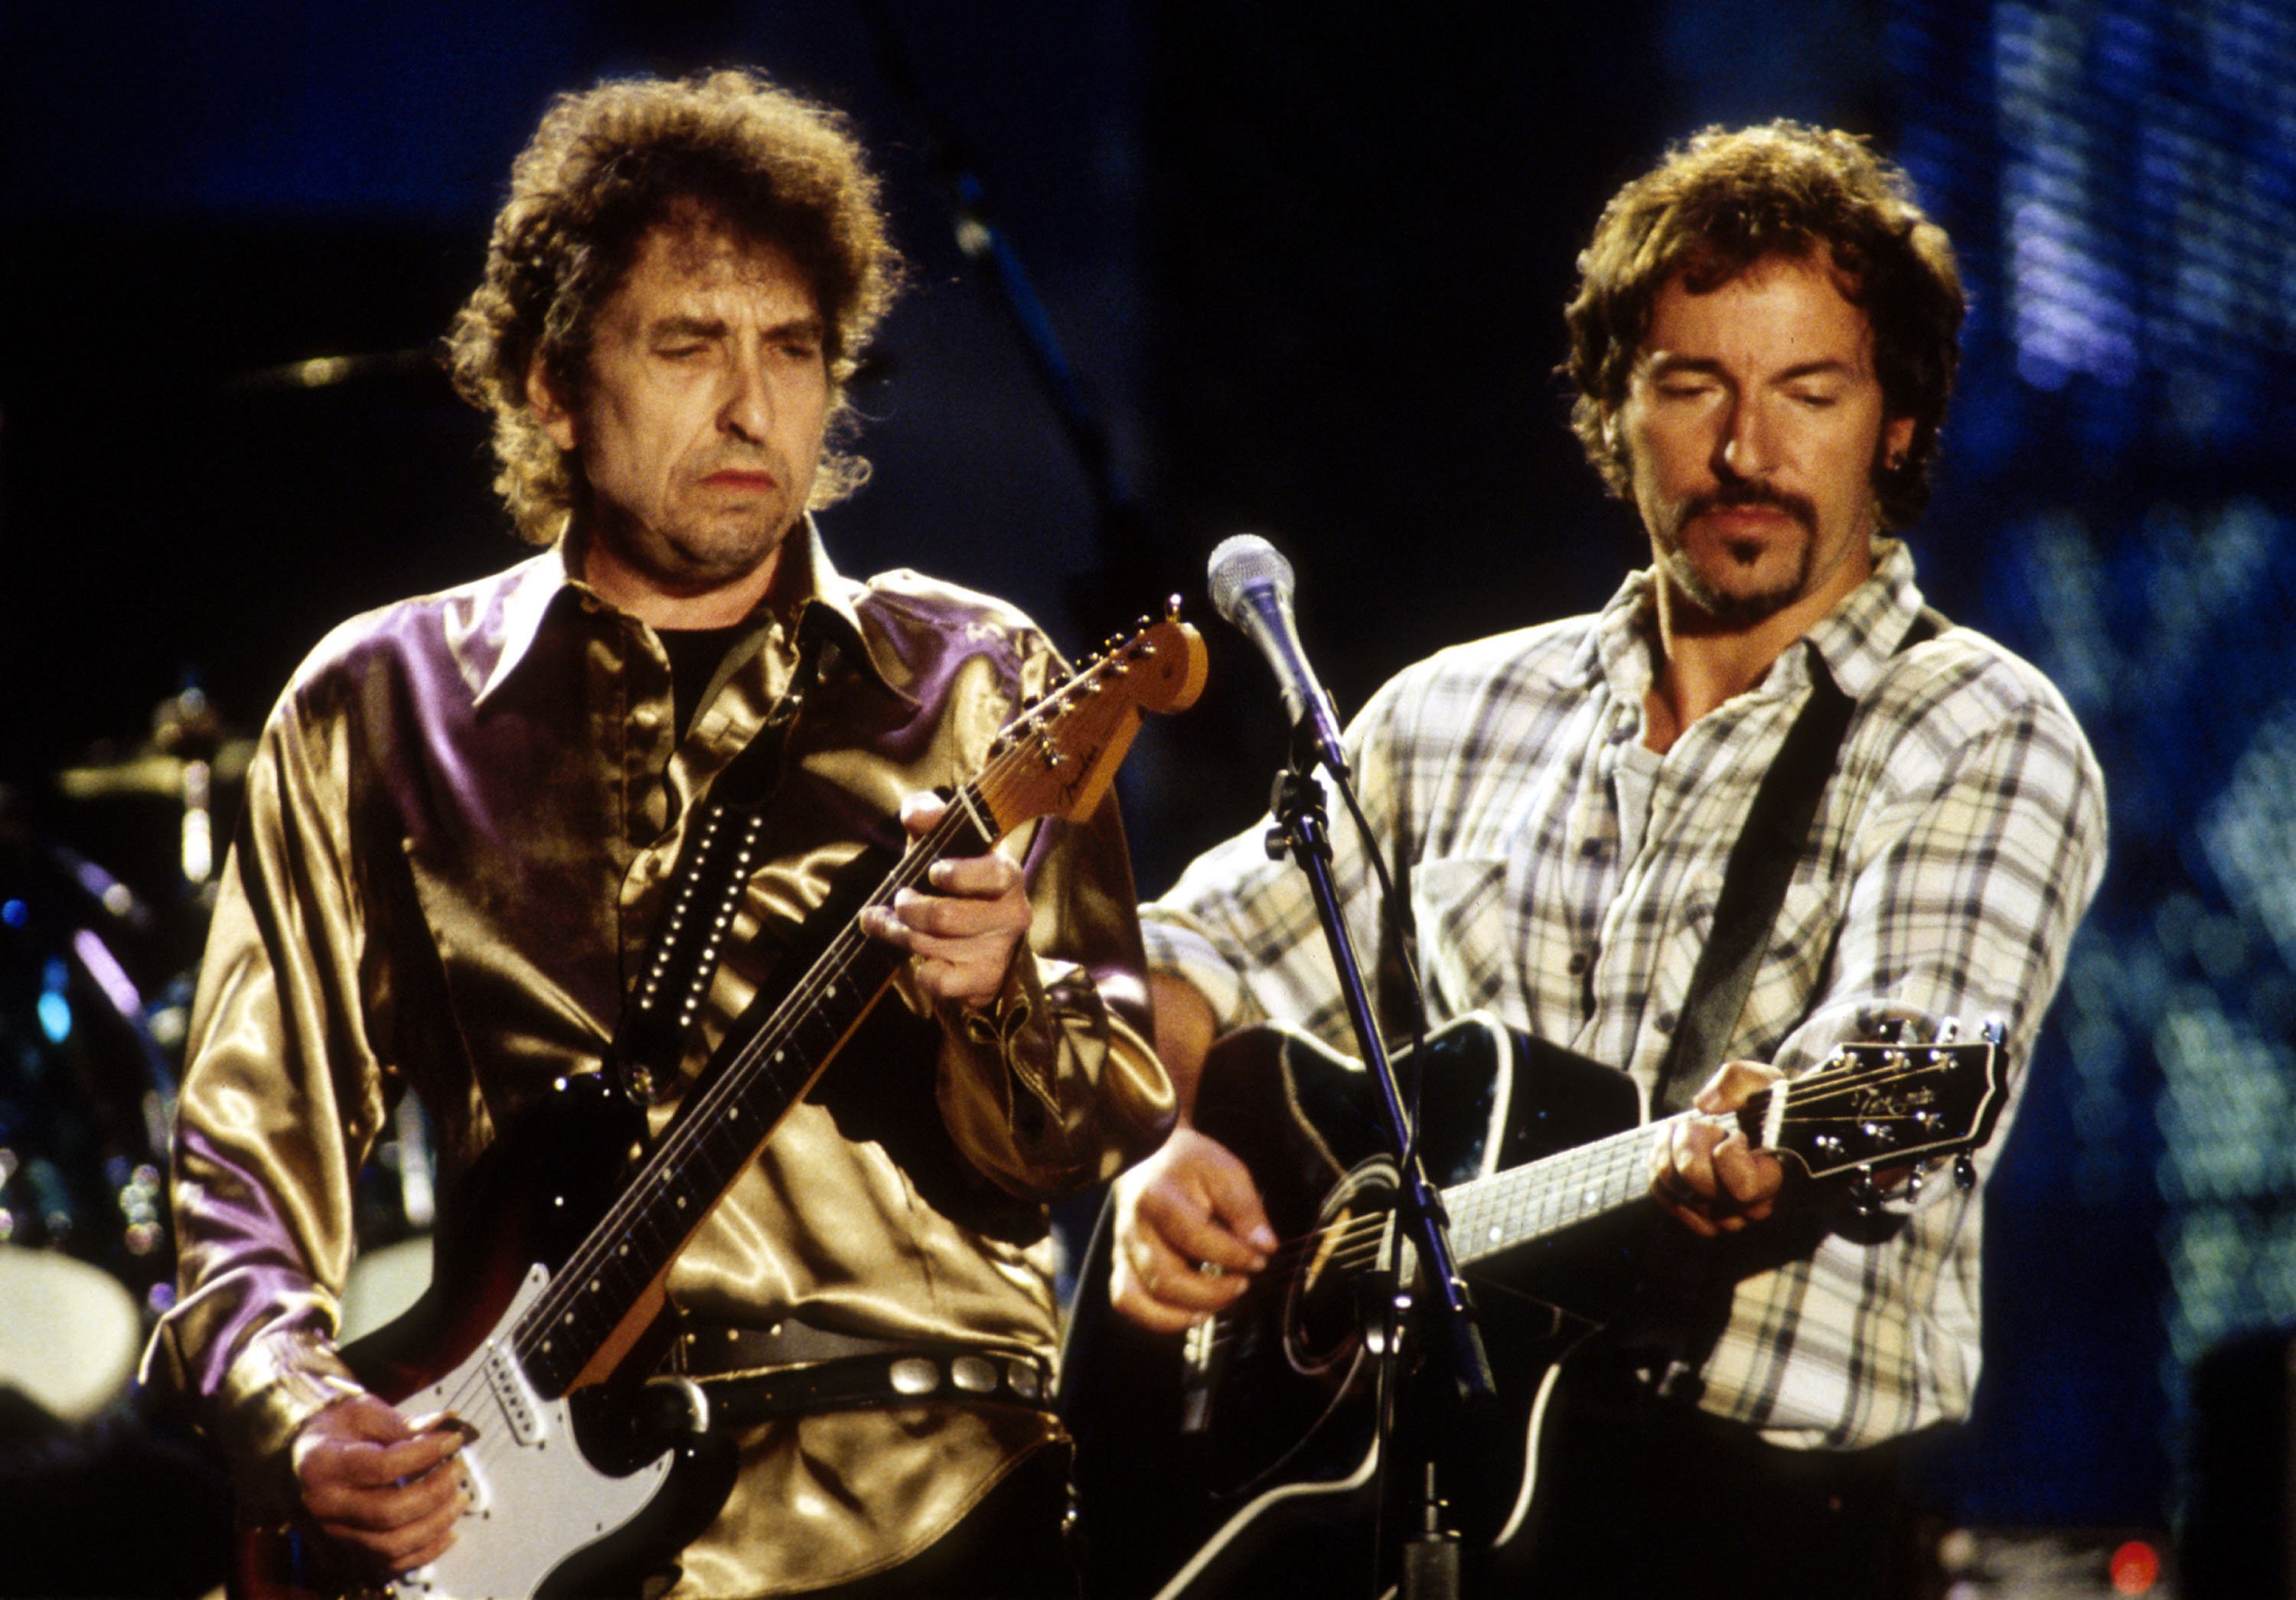 Bob Dylan and Bruce Springsteen perform together in New York City